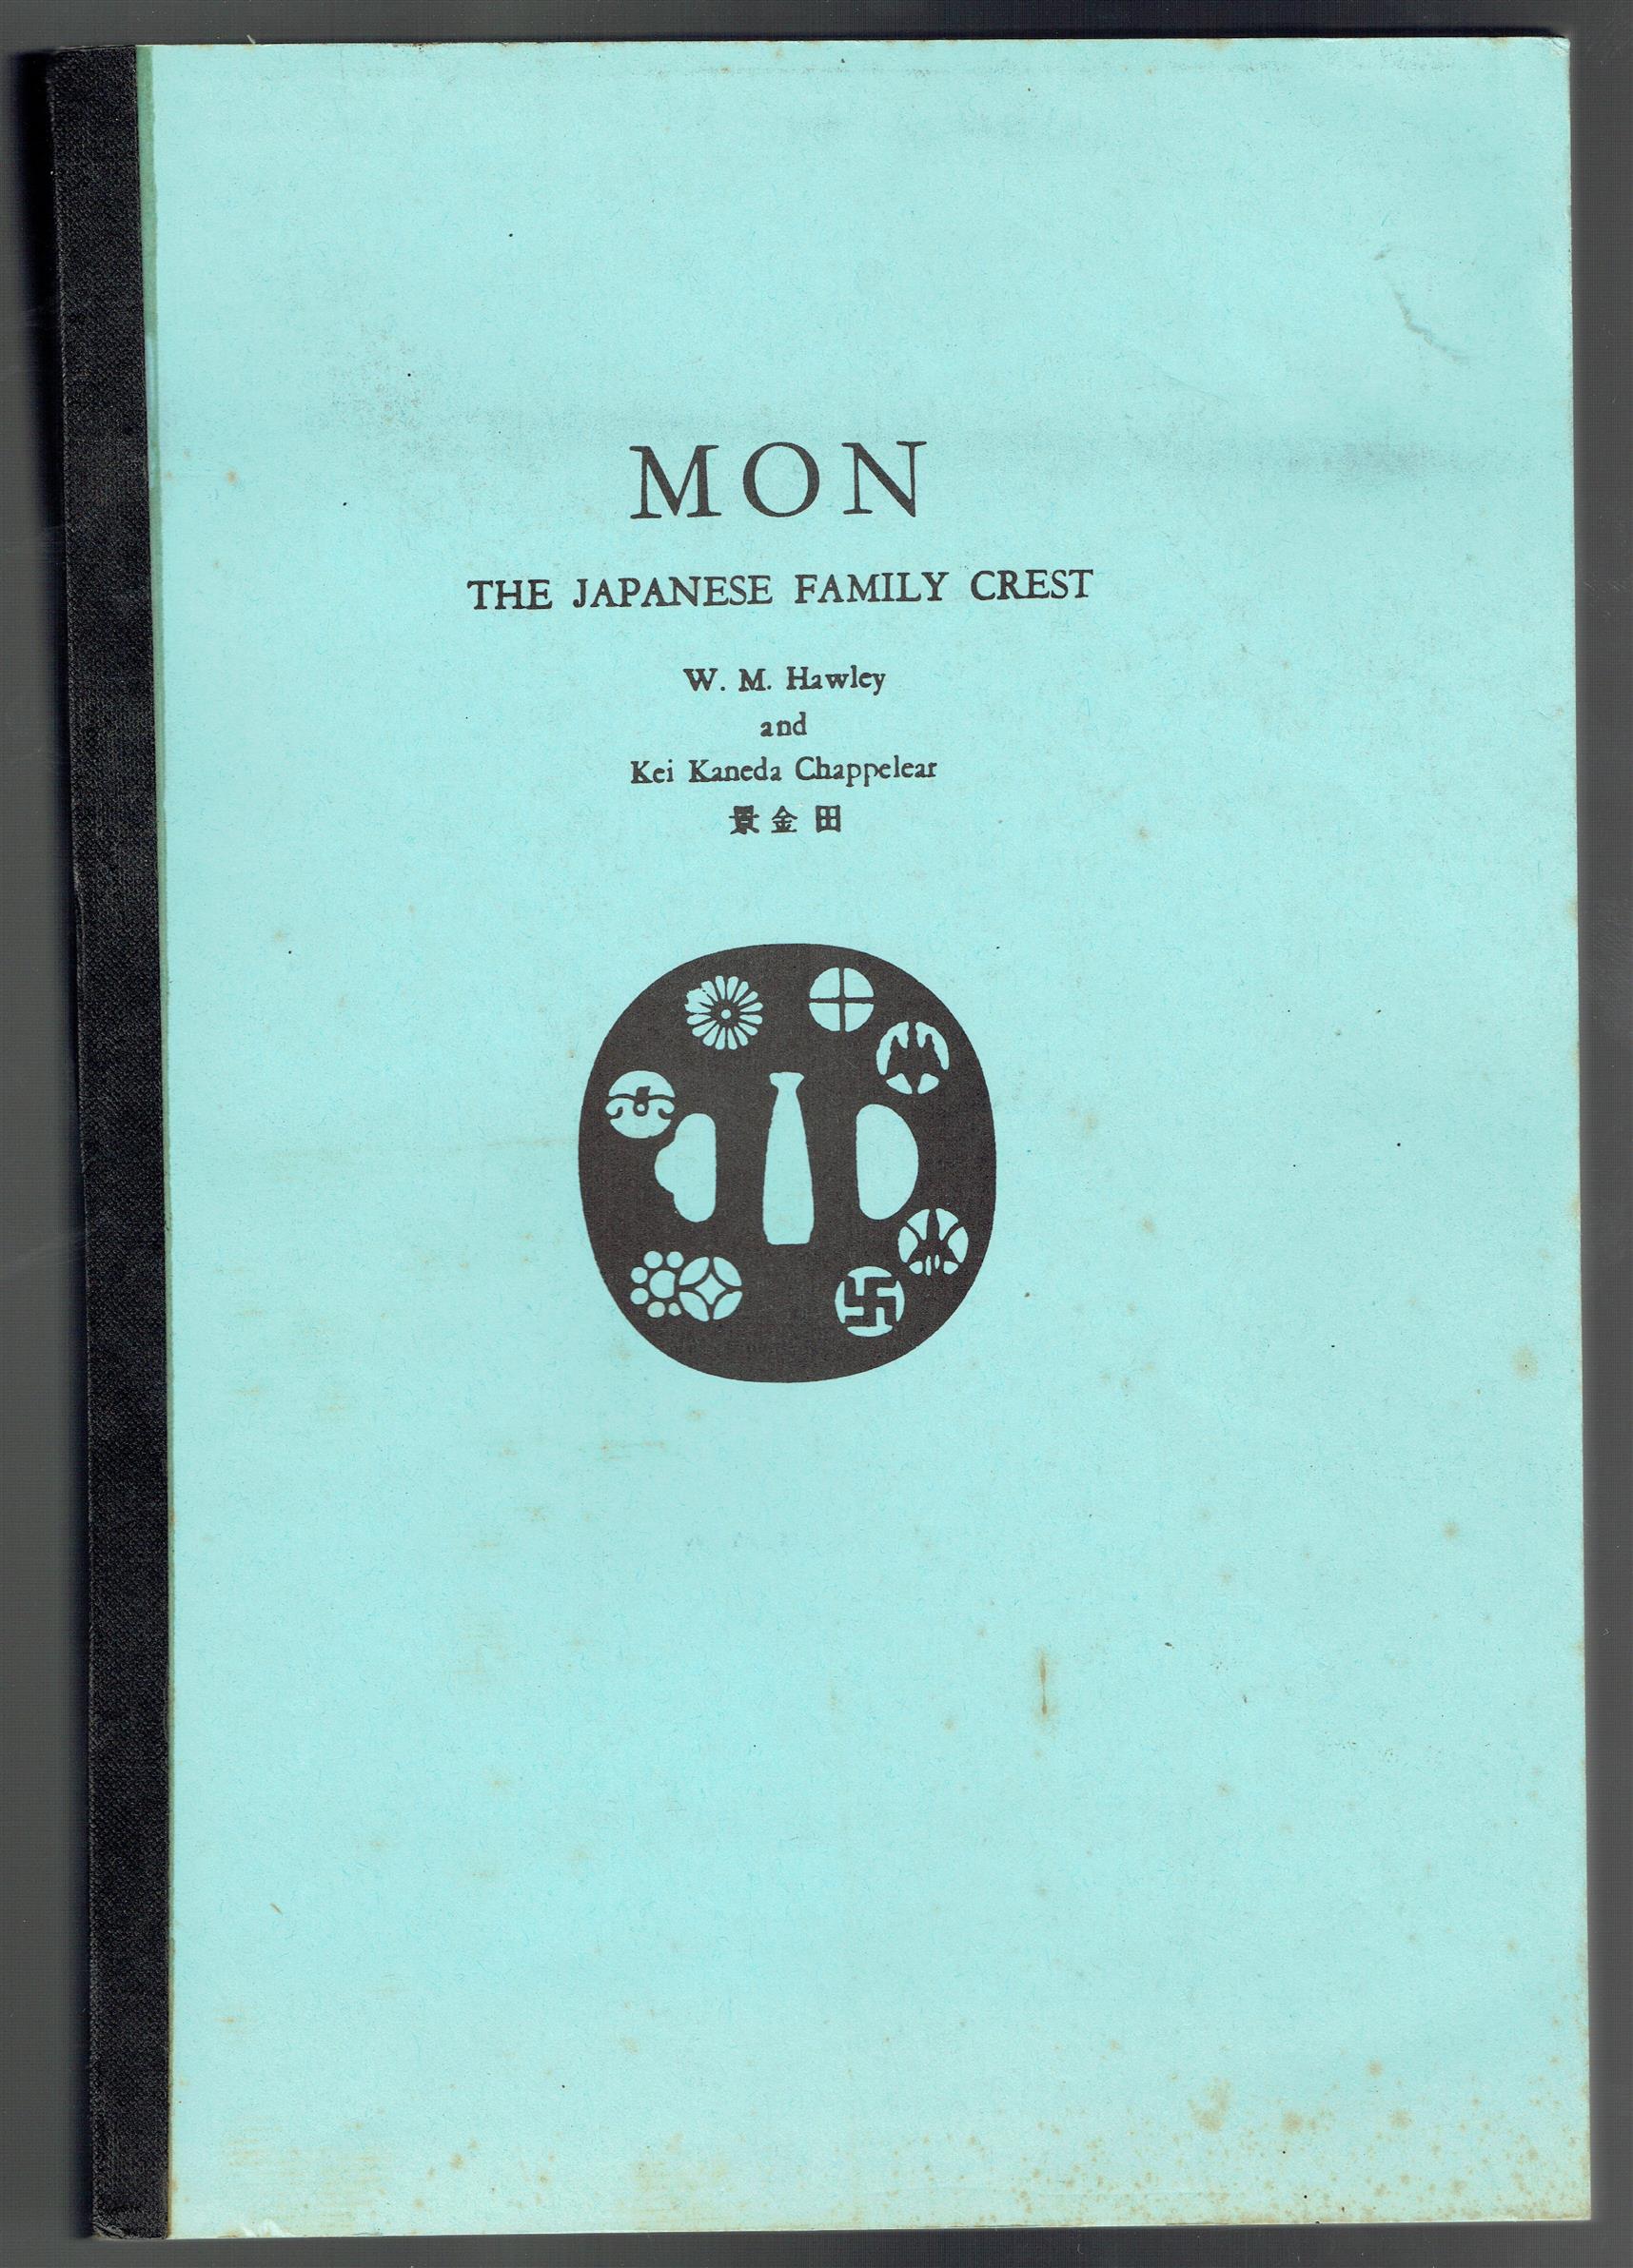 HAWLEY, W. M. (WILLIS MEEKER), 1896-1987. - Mon, the Japanese family crest